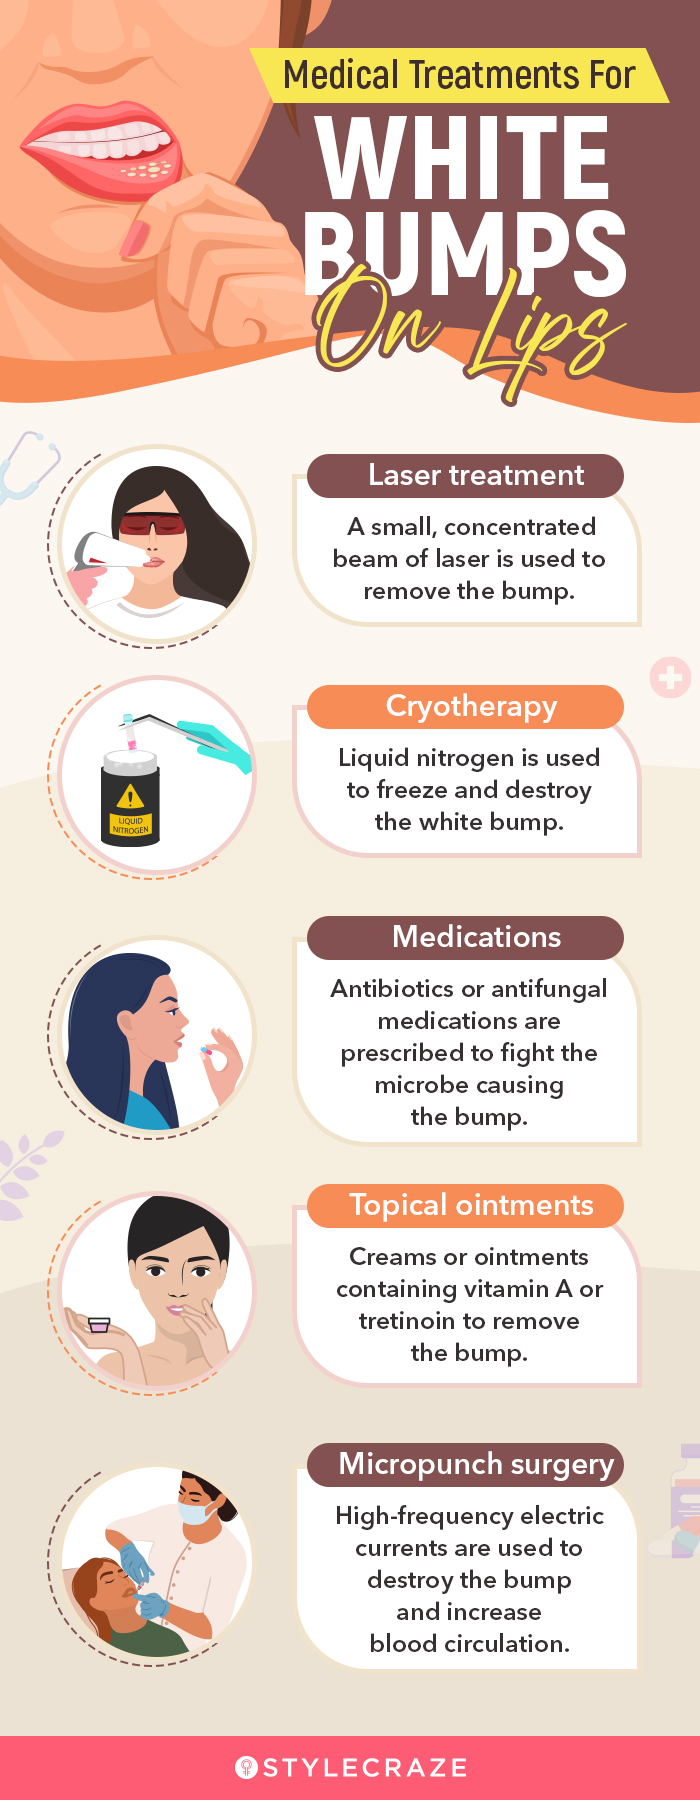 medical treatments for white bumps on lips [infographic]